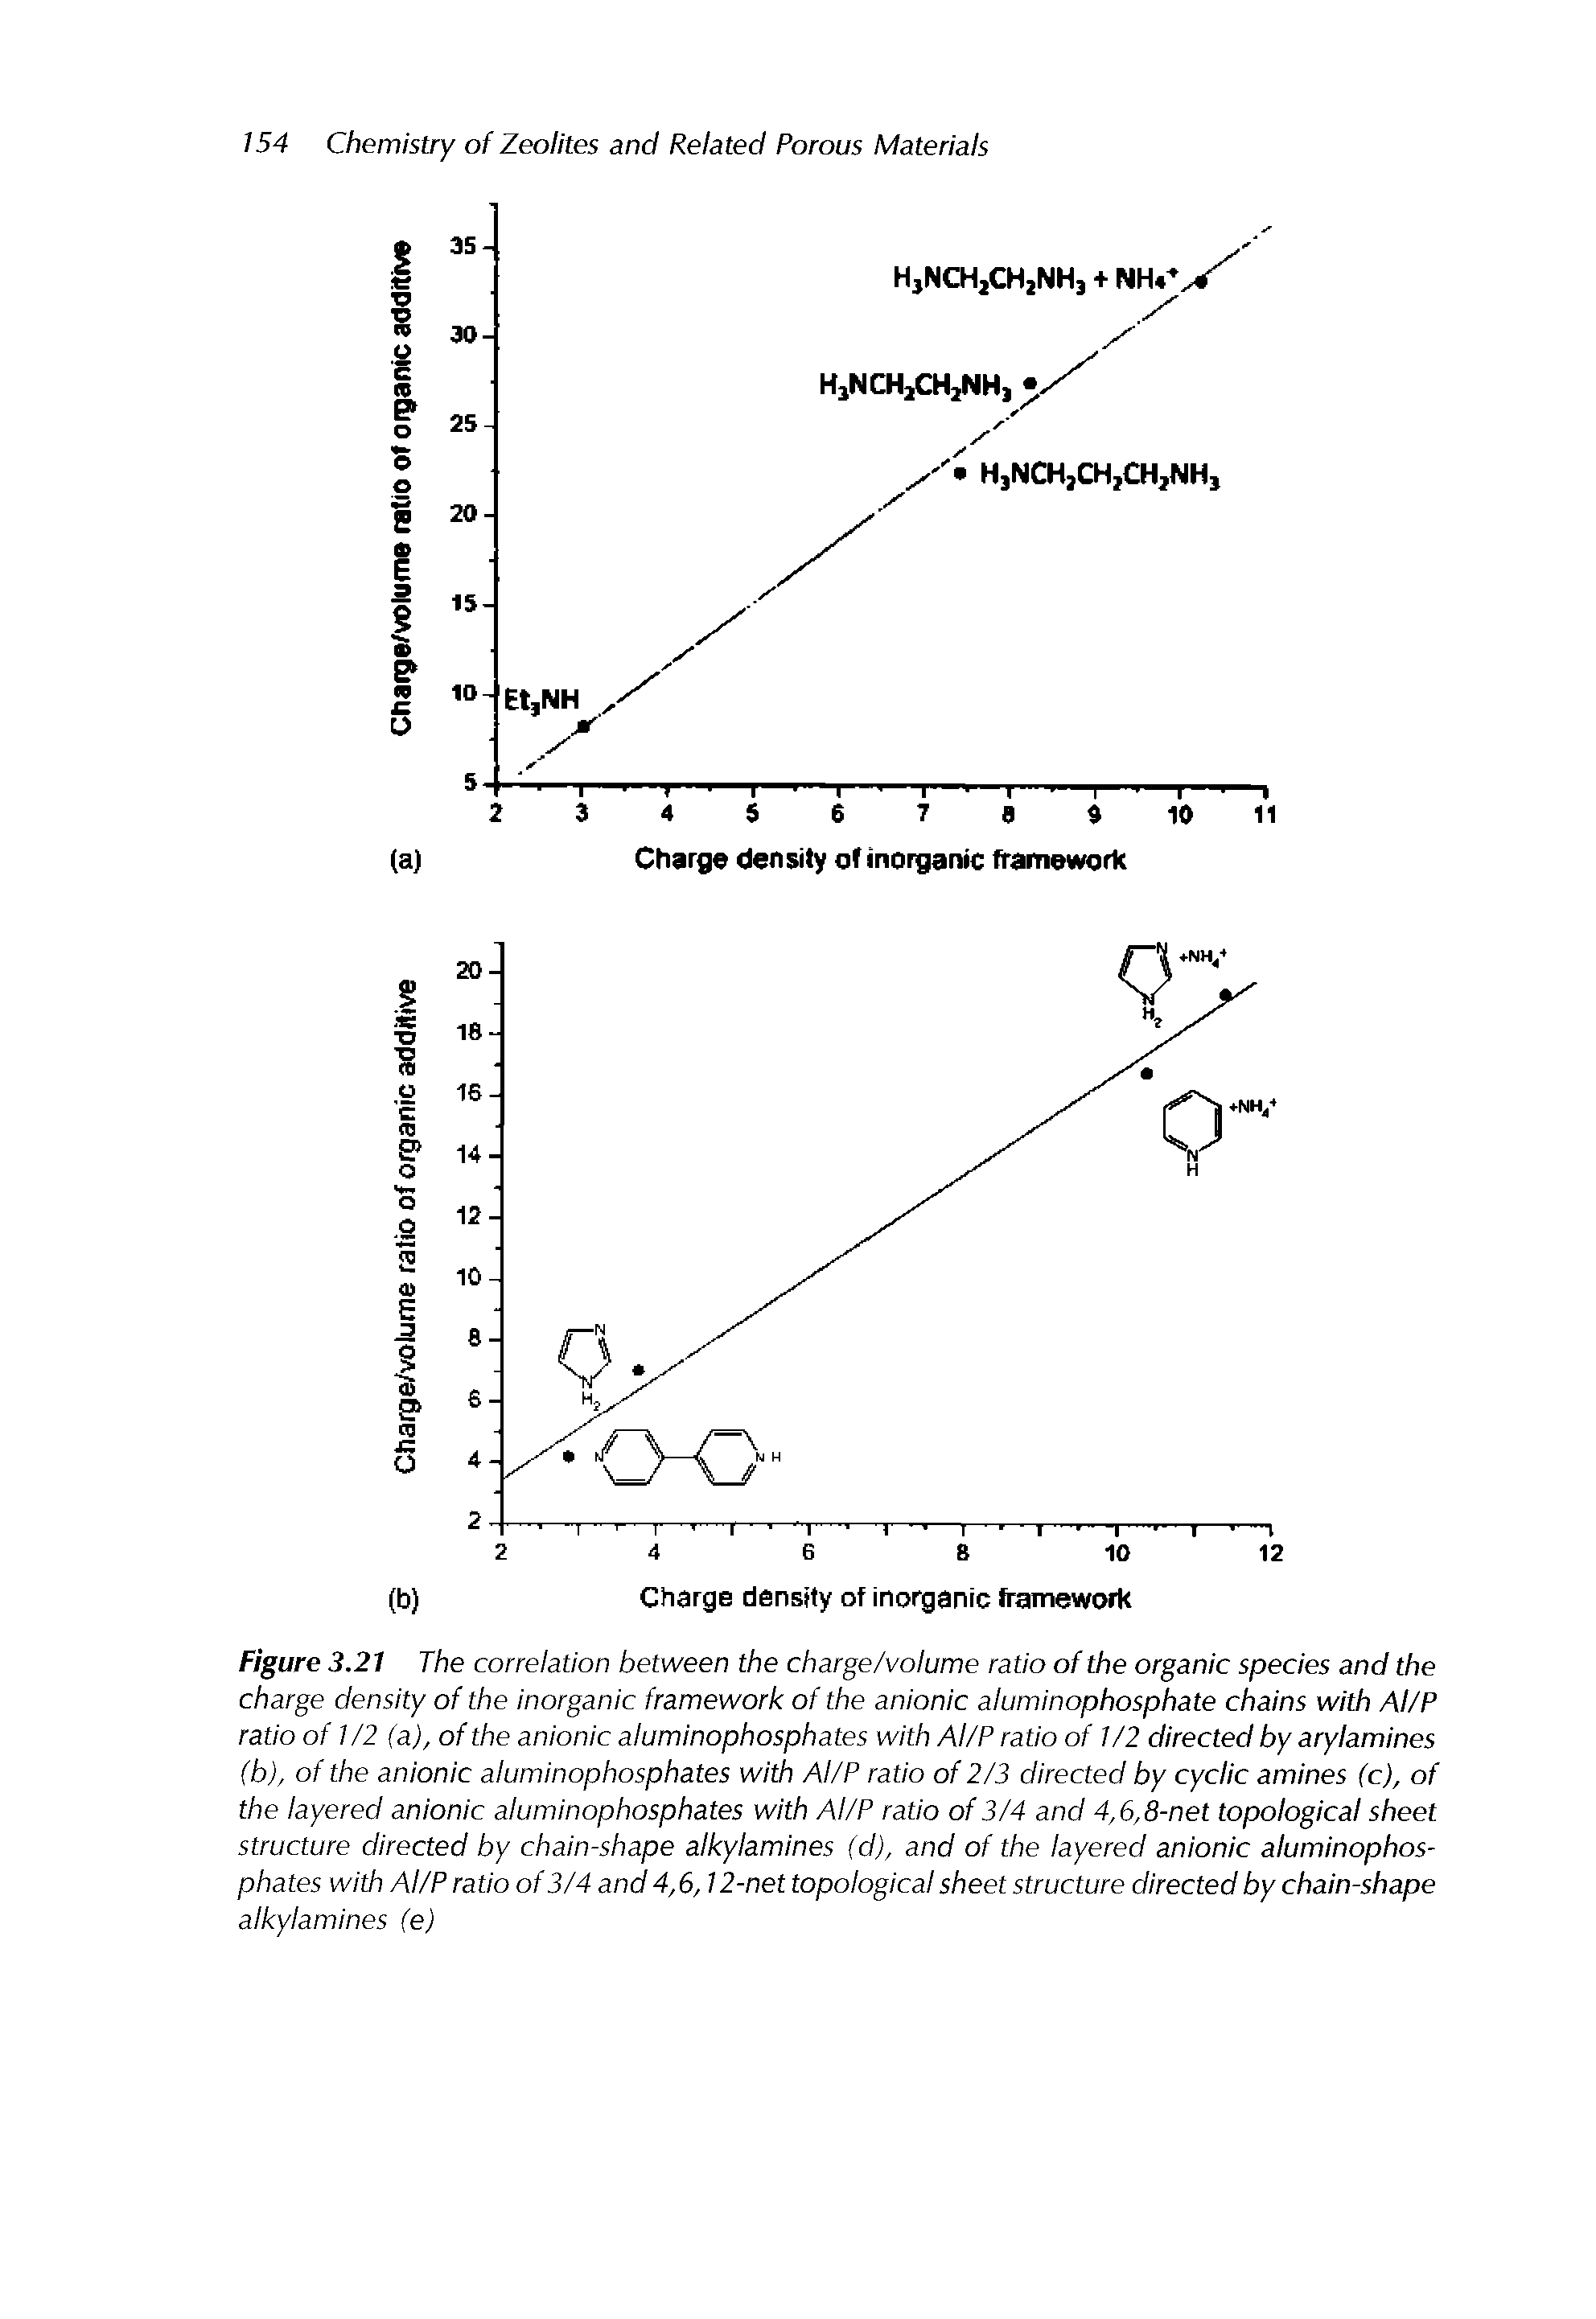 Figure 3.21 The correlation between the charge/volume ratio of the organic species and the charge density of the inorganic framework of the anionic aluminophosphate chains with Al/P ratio of 1/2 (a), of the anionic aluminophosphates with Al/P ratio of 1/2 directed by arylamines (b), of the anionic aluminophosphates with Al/P ratio of 2/3 directed by cyclic amines (c), of the layered anionic aluminophosphates with Al/P ratio of 3/4 and 4,6,8-net topological sheet structure directed by chain-shape alkylamines (d), and of the layered anionic aluminophosphates with Al/P ratio of 3/4 and 4,6,12-net topological sheet structure directed by chain-shape alkylamines (e)...